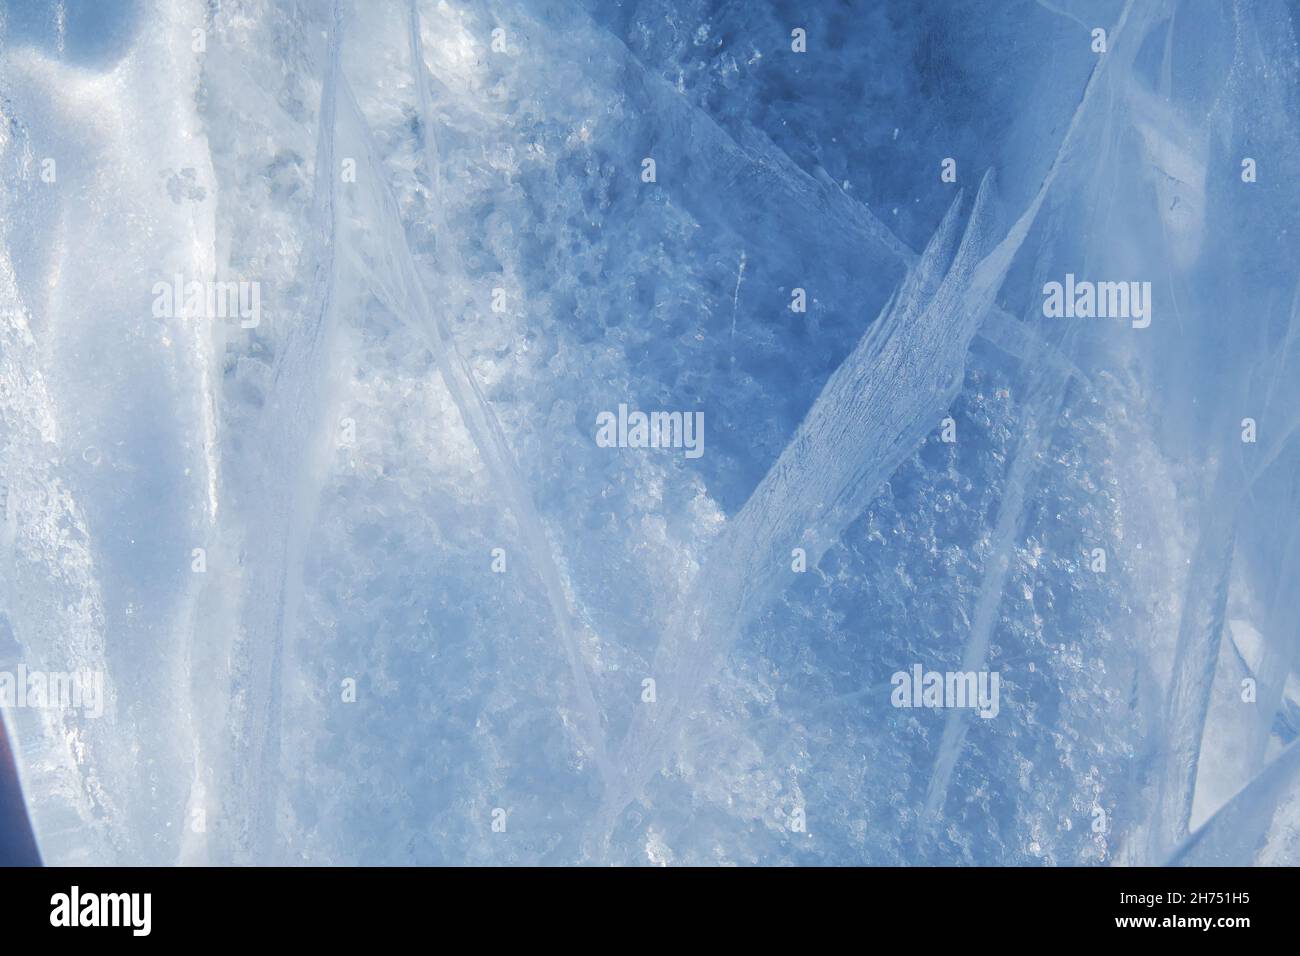 Texture of winter ice surface. Blue natural ice background. Stock Photo